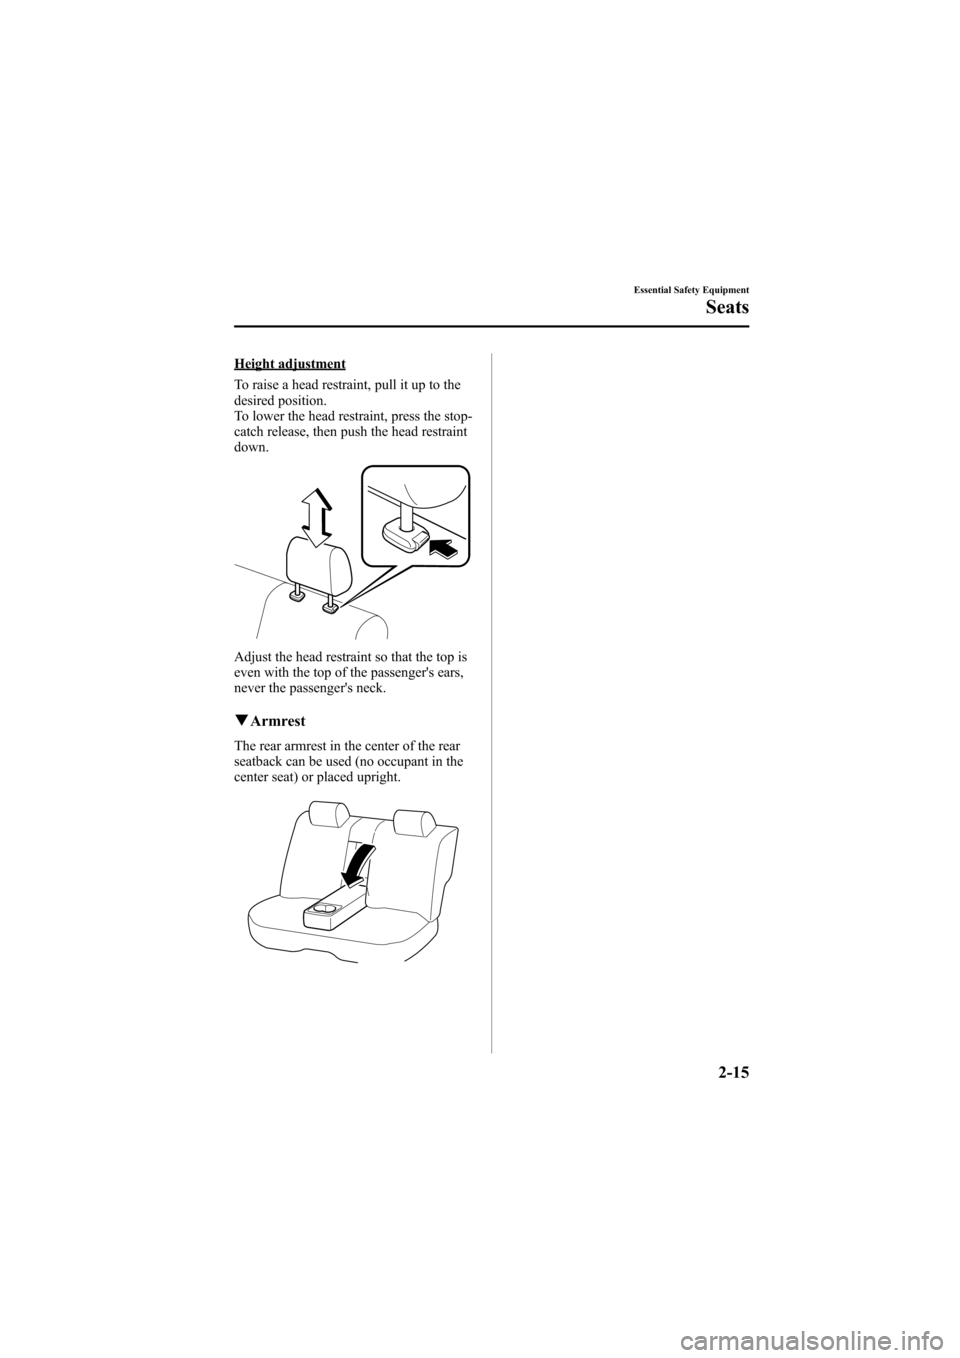 MAZDA MODEL 6 2007  Owners Manual (in English) Black plate (29,1)
Height adjustment
To raise a head restraint, pull it up to the
desired position.
To lower the head restraint, press the stop-
catch release, then push the head restraint
down.
Adjus